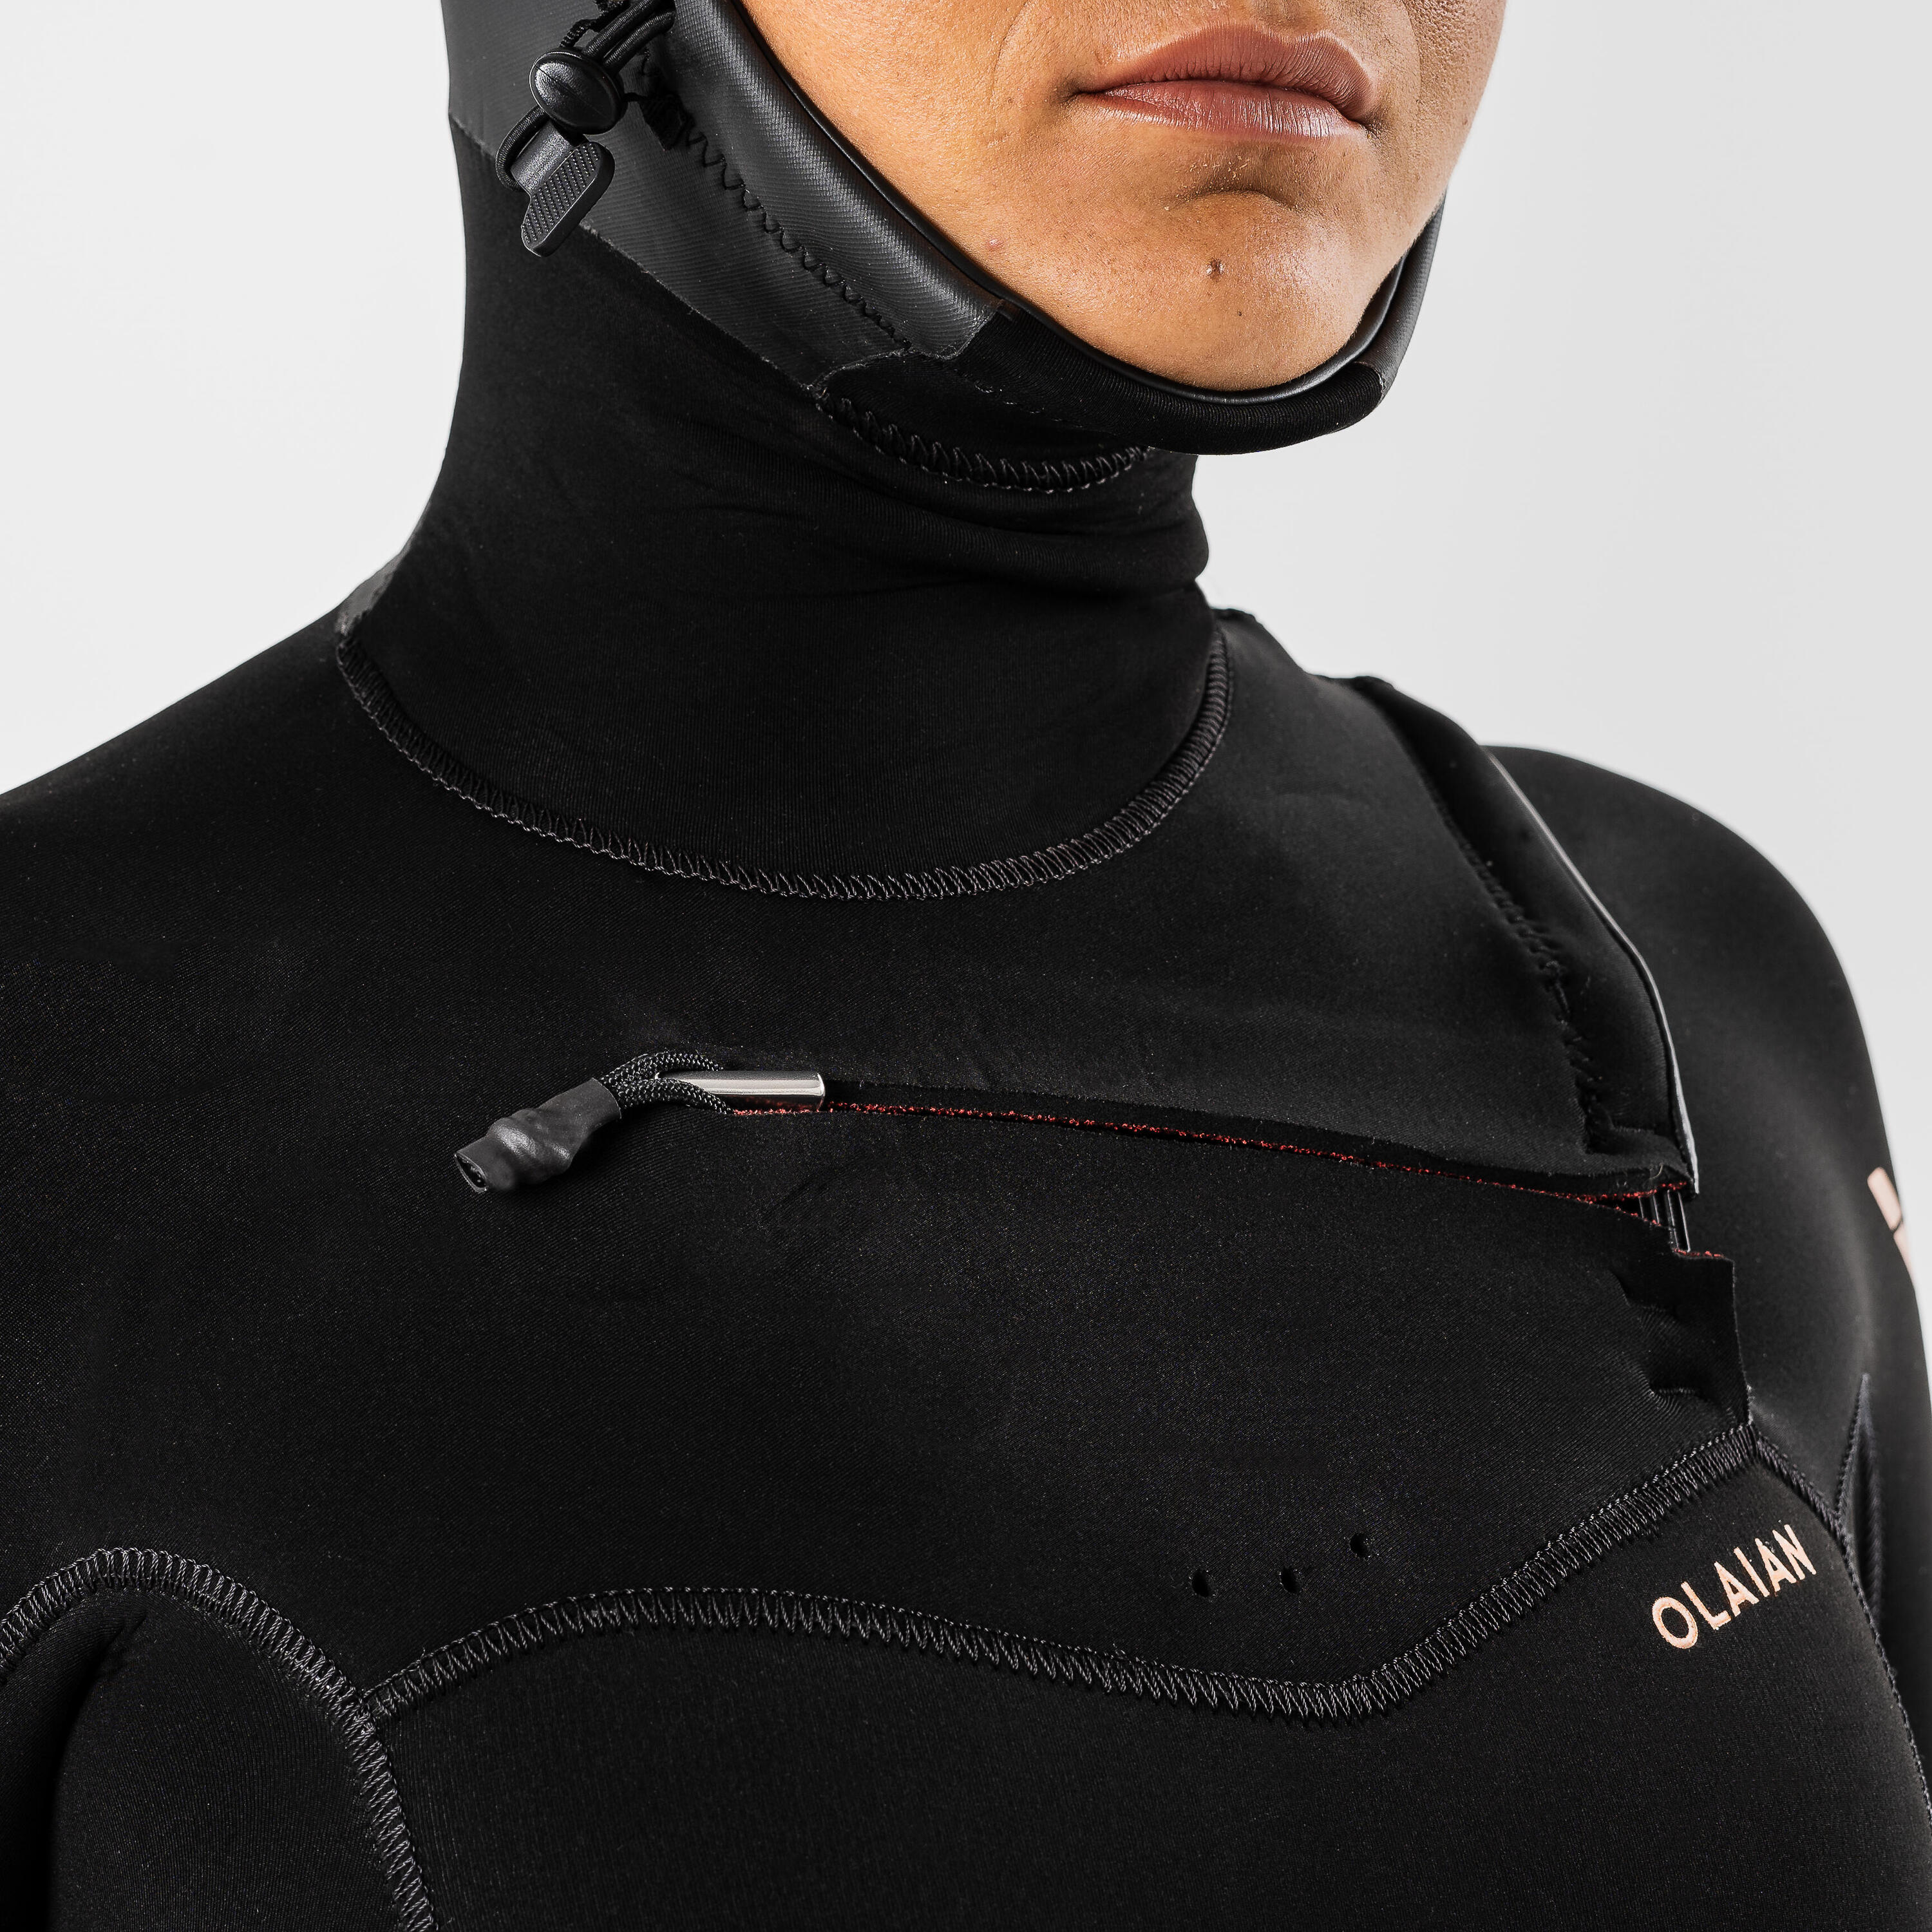 Women's Advanced Surfing 5/4 Neoprene Diving Suit with Hood and Chest Zip  5/13